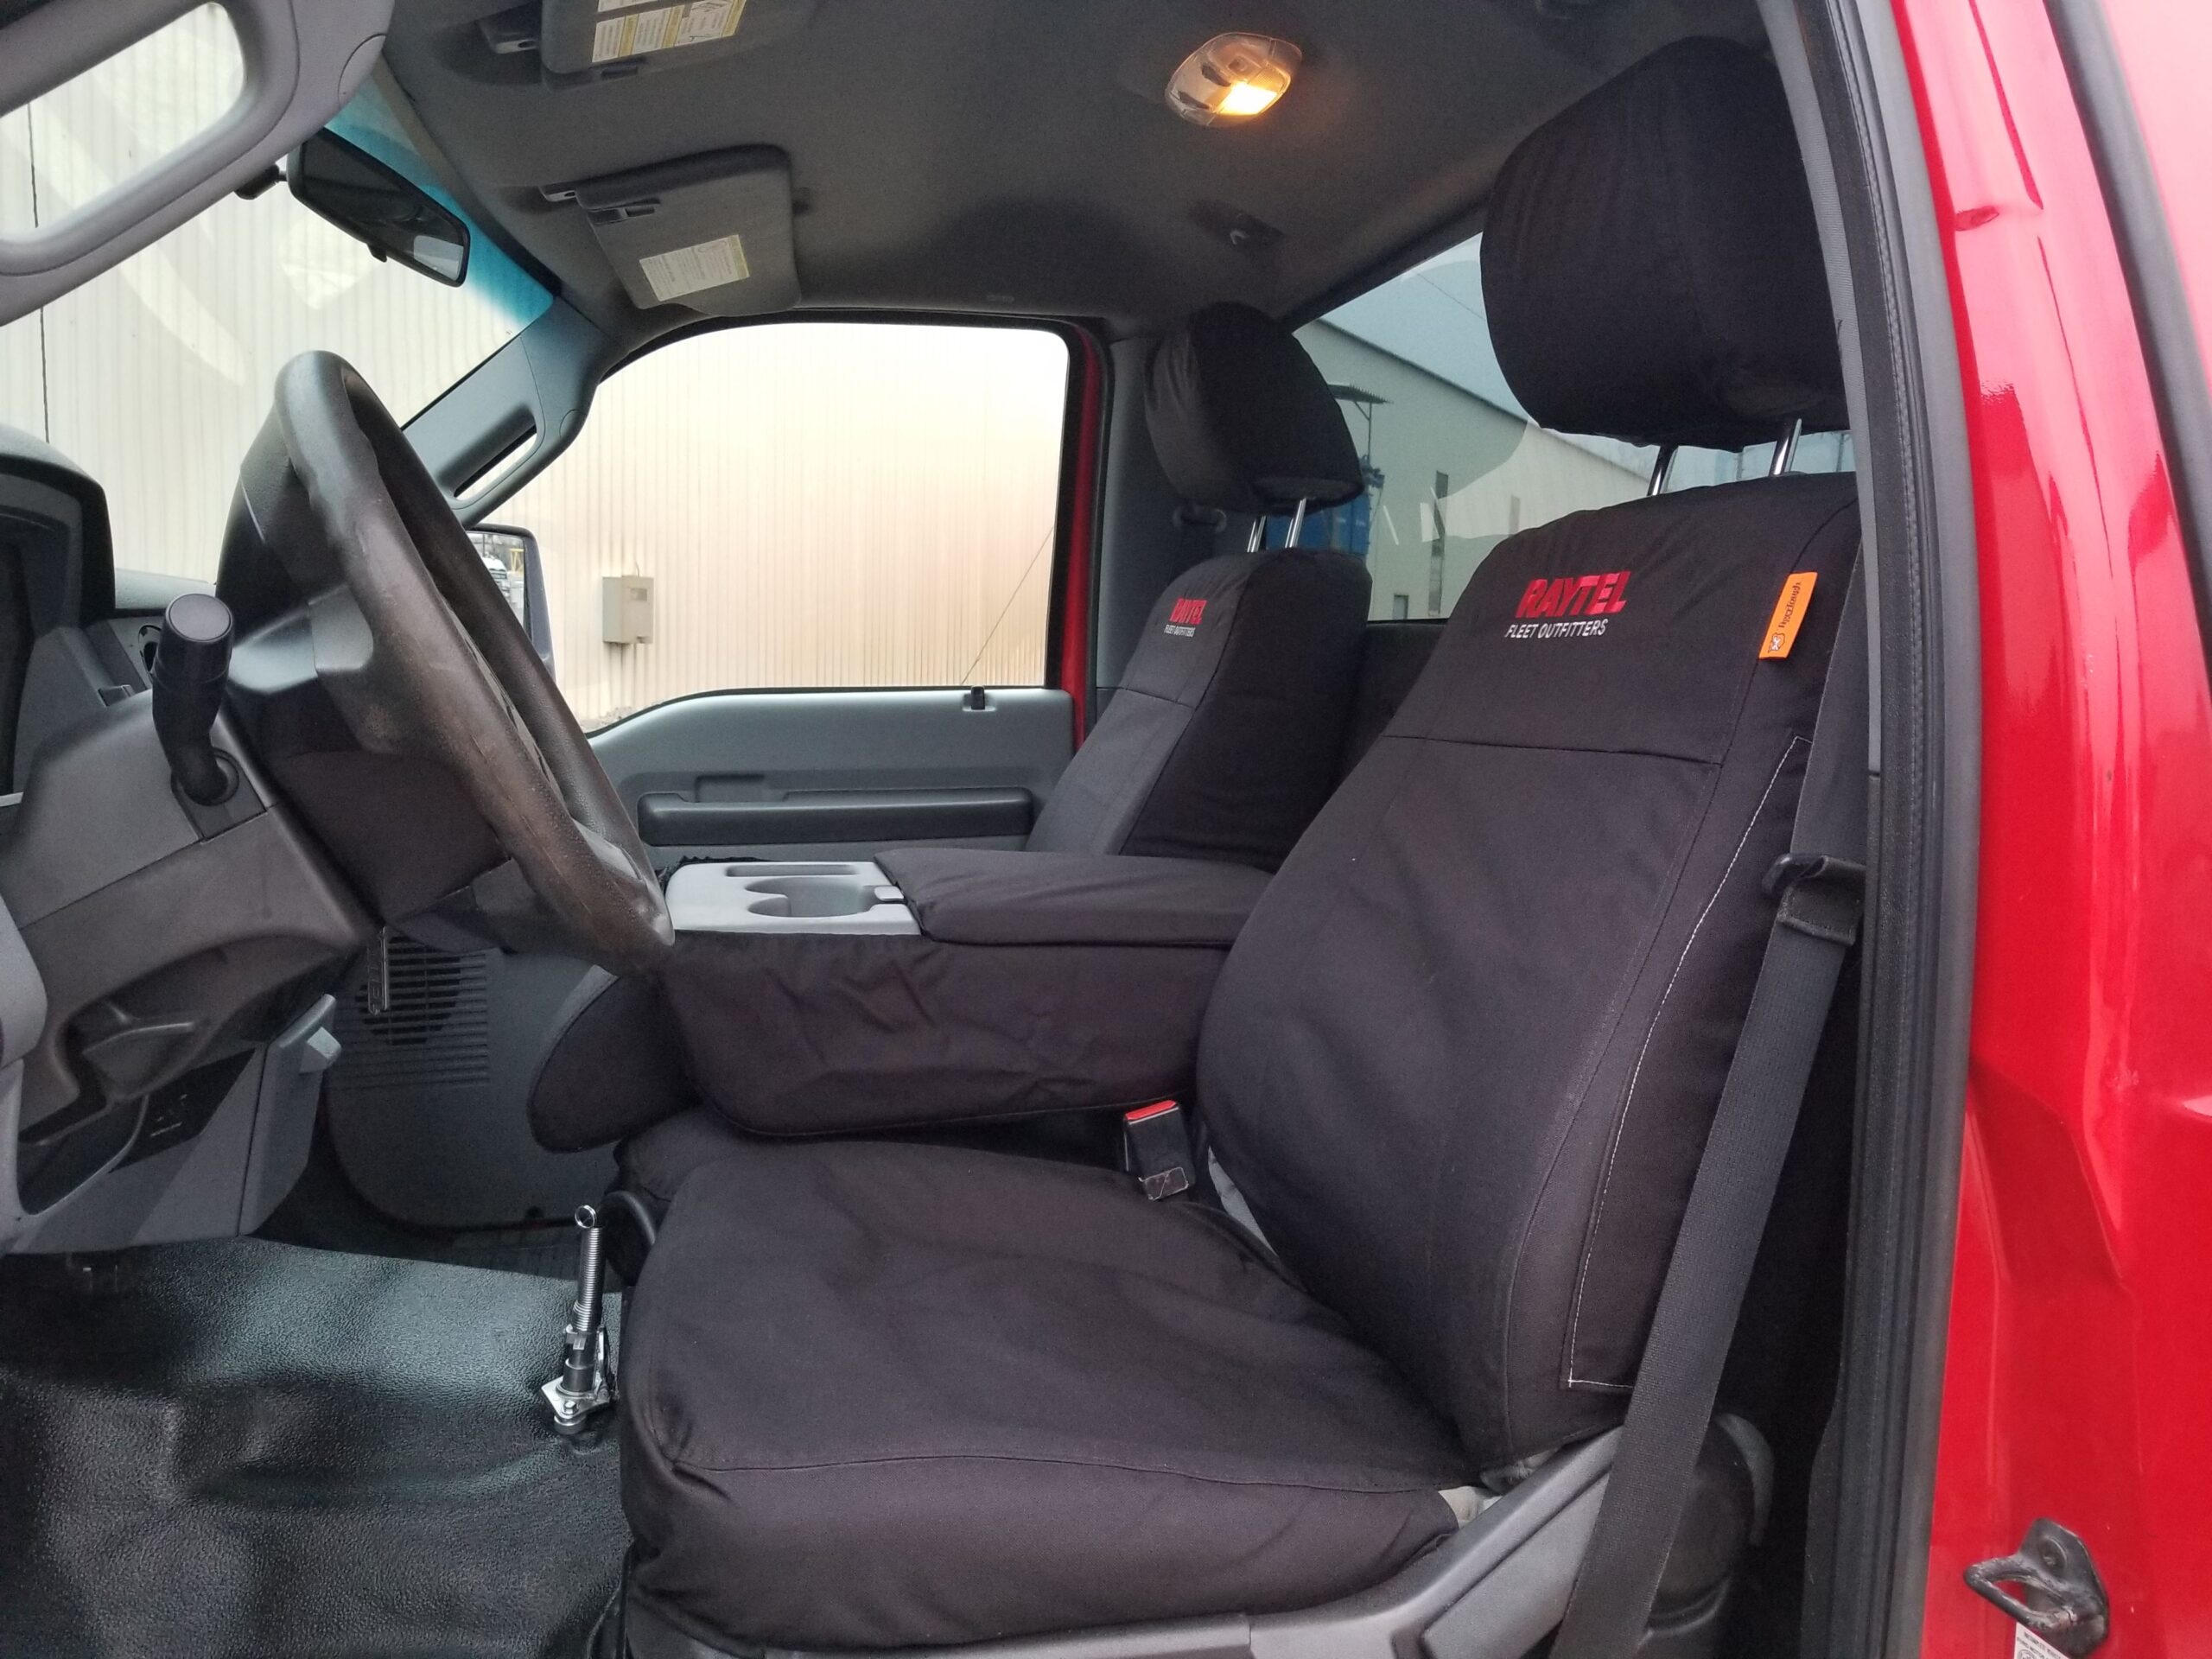 Tiger Tough Vehicle Seat Covers